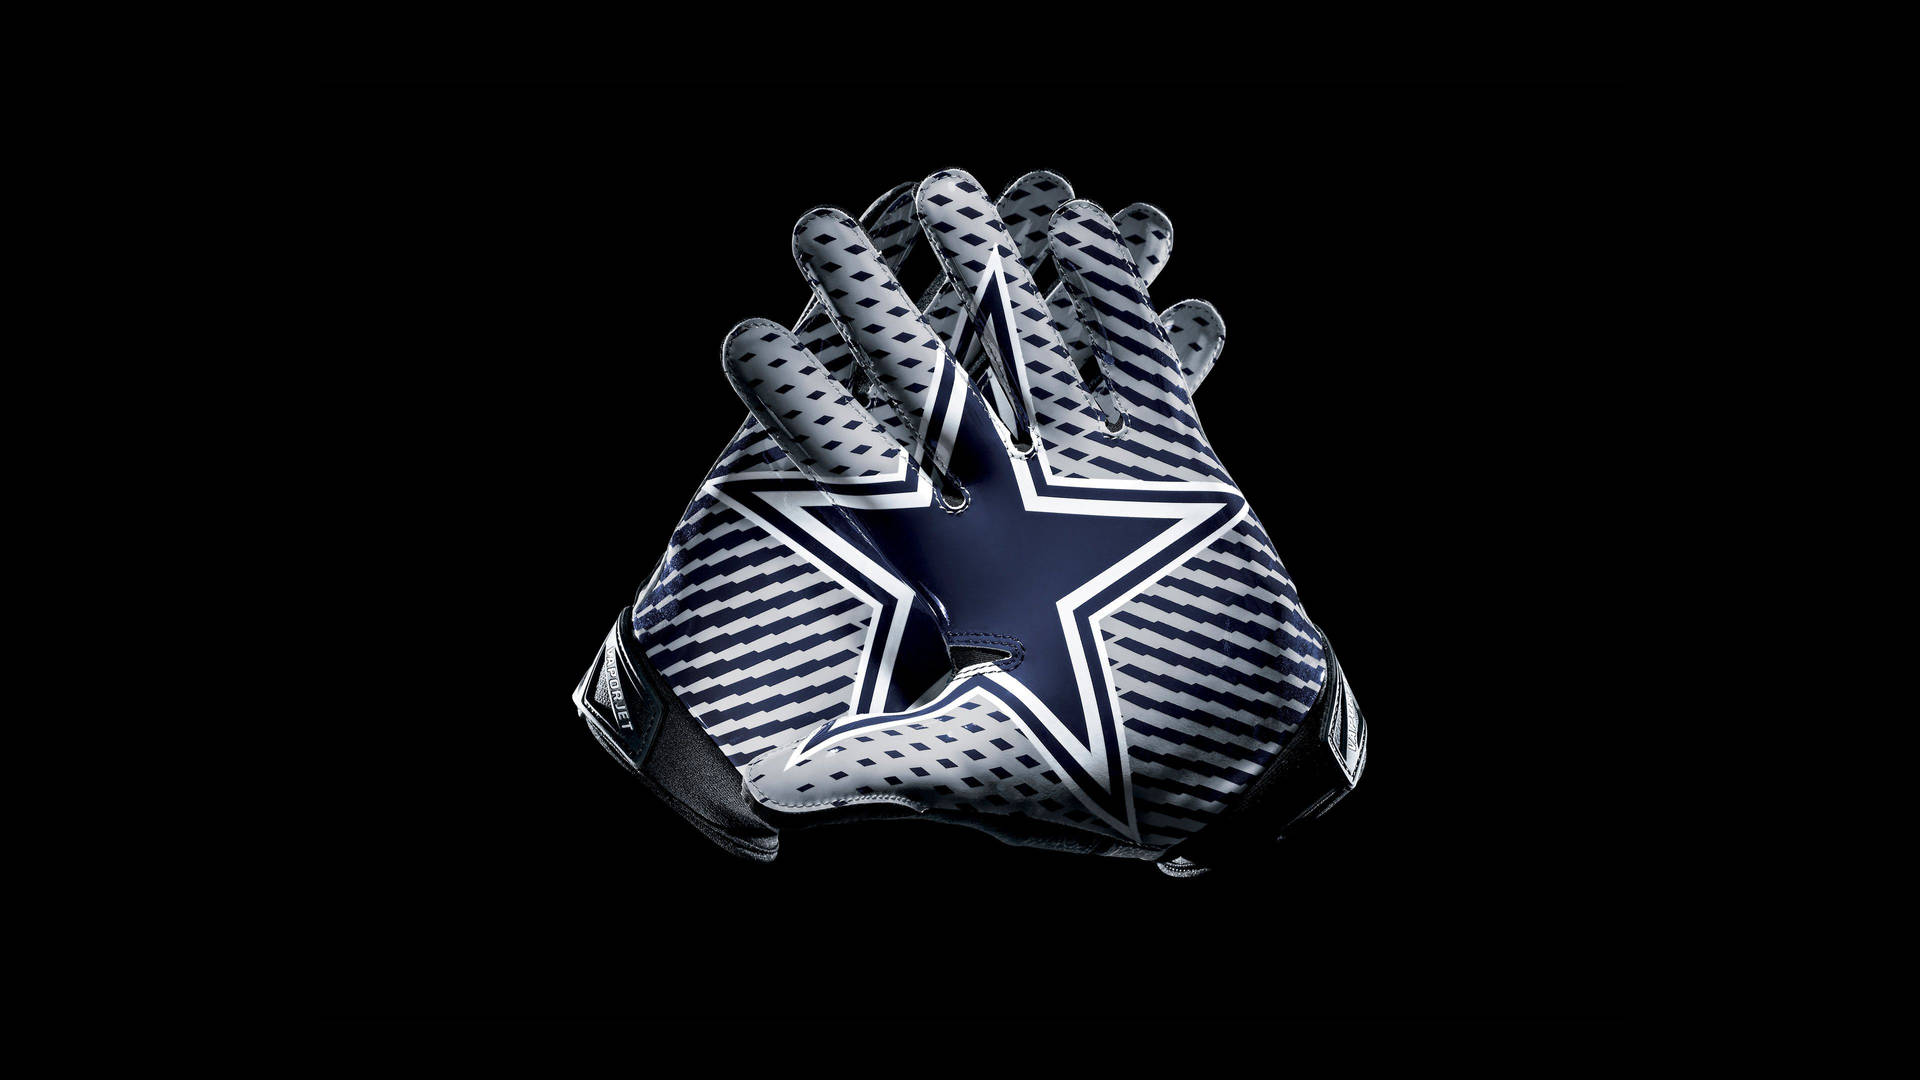 3840X2160 Dallas Cowboys Wallpaper and Background